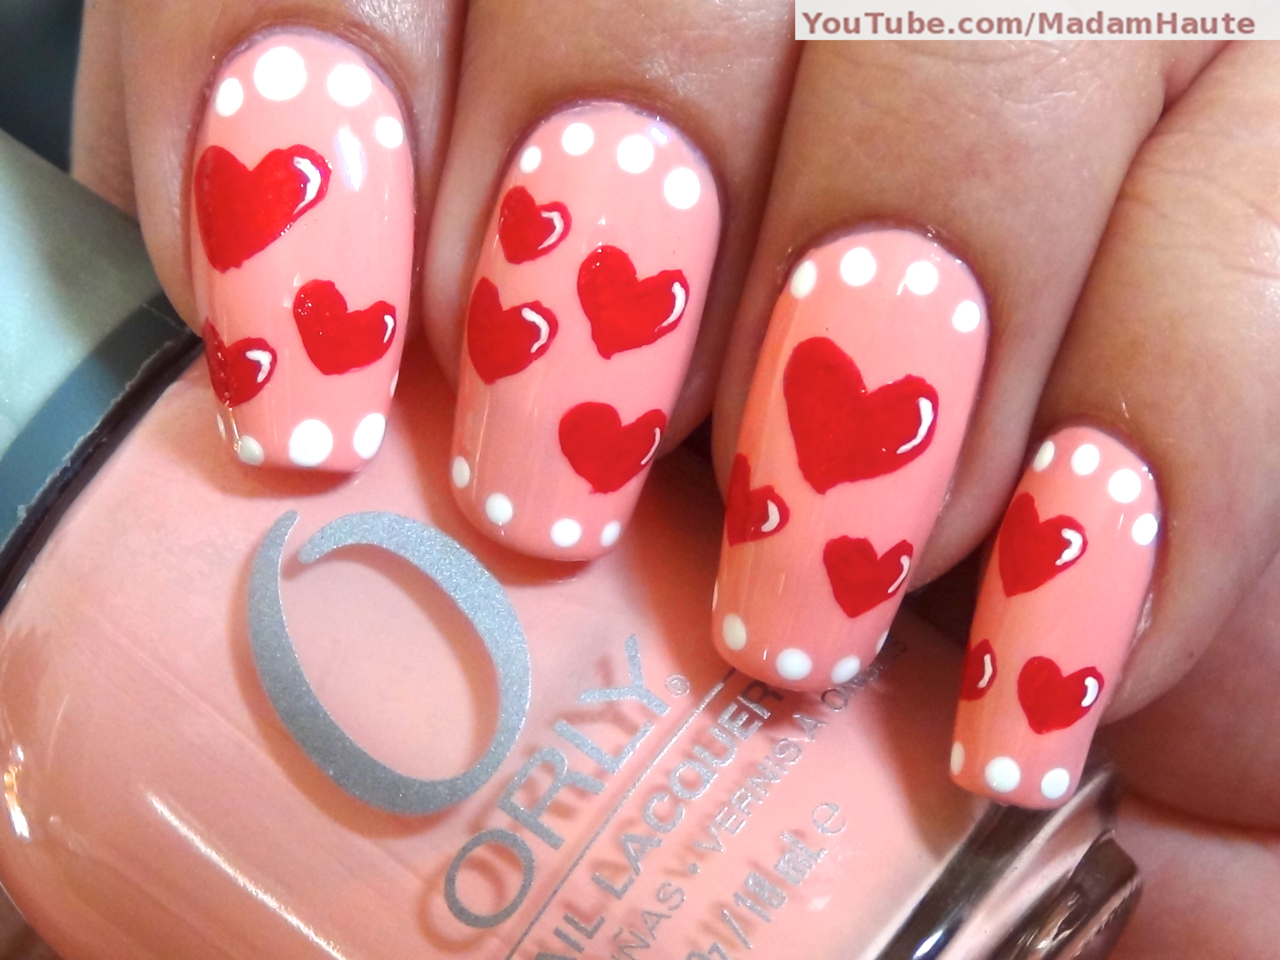 6. Hand Drawn Pink Heart Nail Design - wide 3